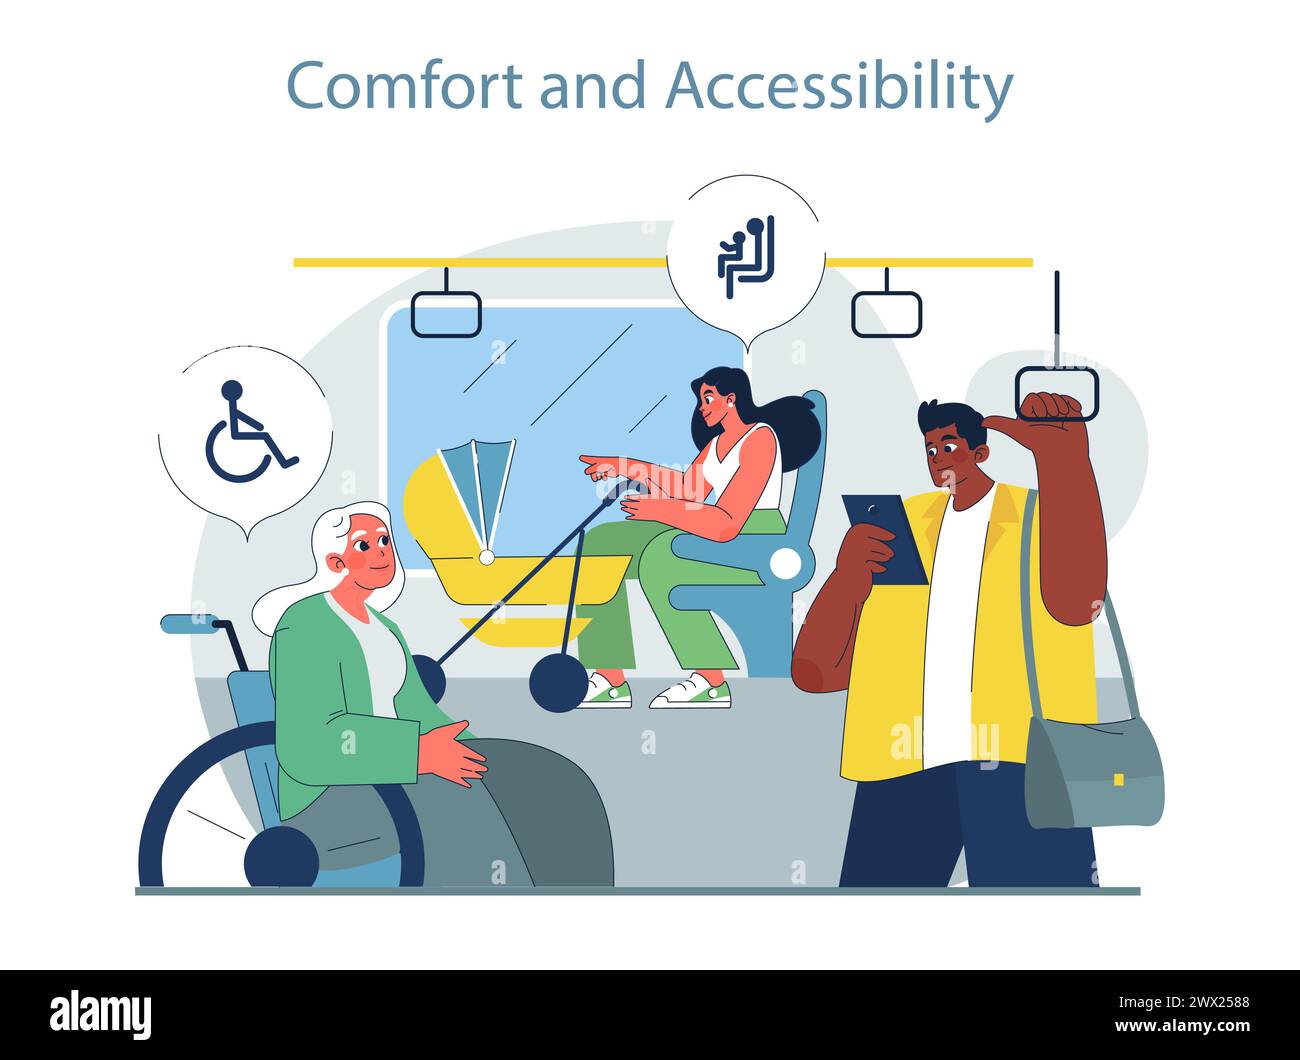 Comfort and Accessibility concept. Diverse passengers using inclusive public transit features. Enhancing urban travel for all. Stock Vector